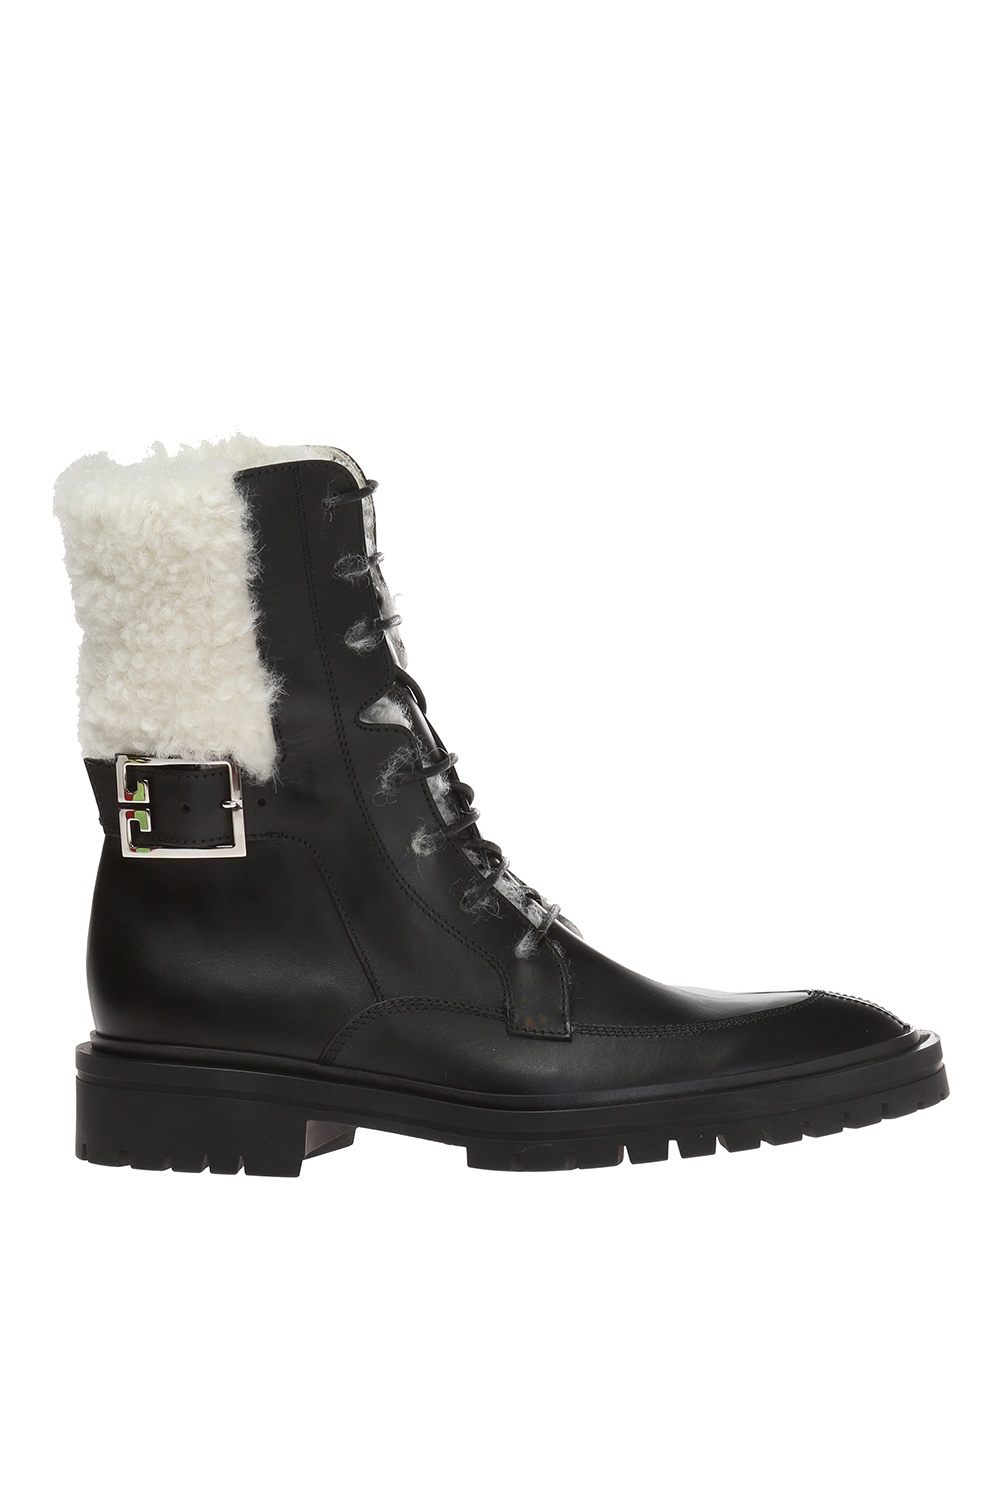 givenchy snow boots